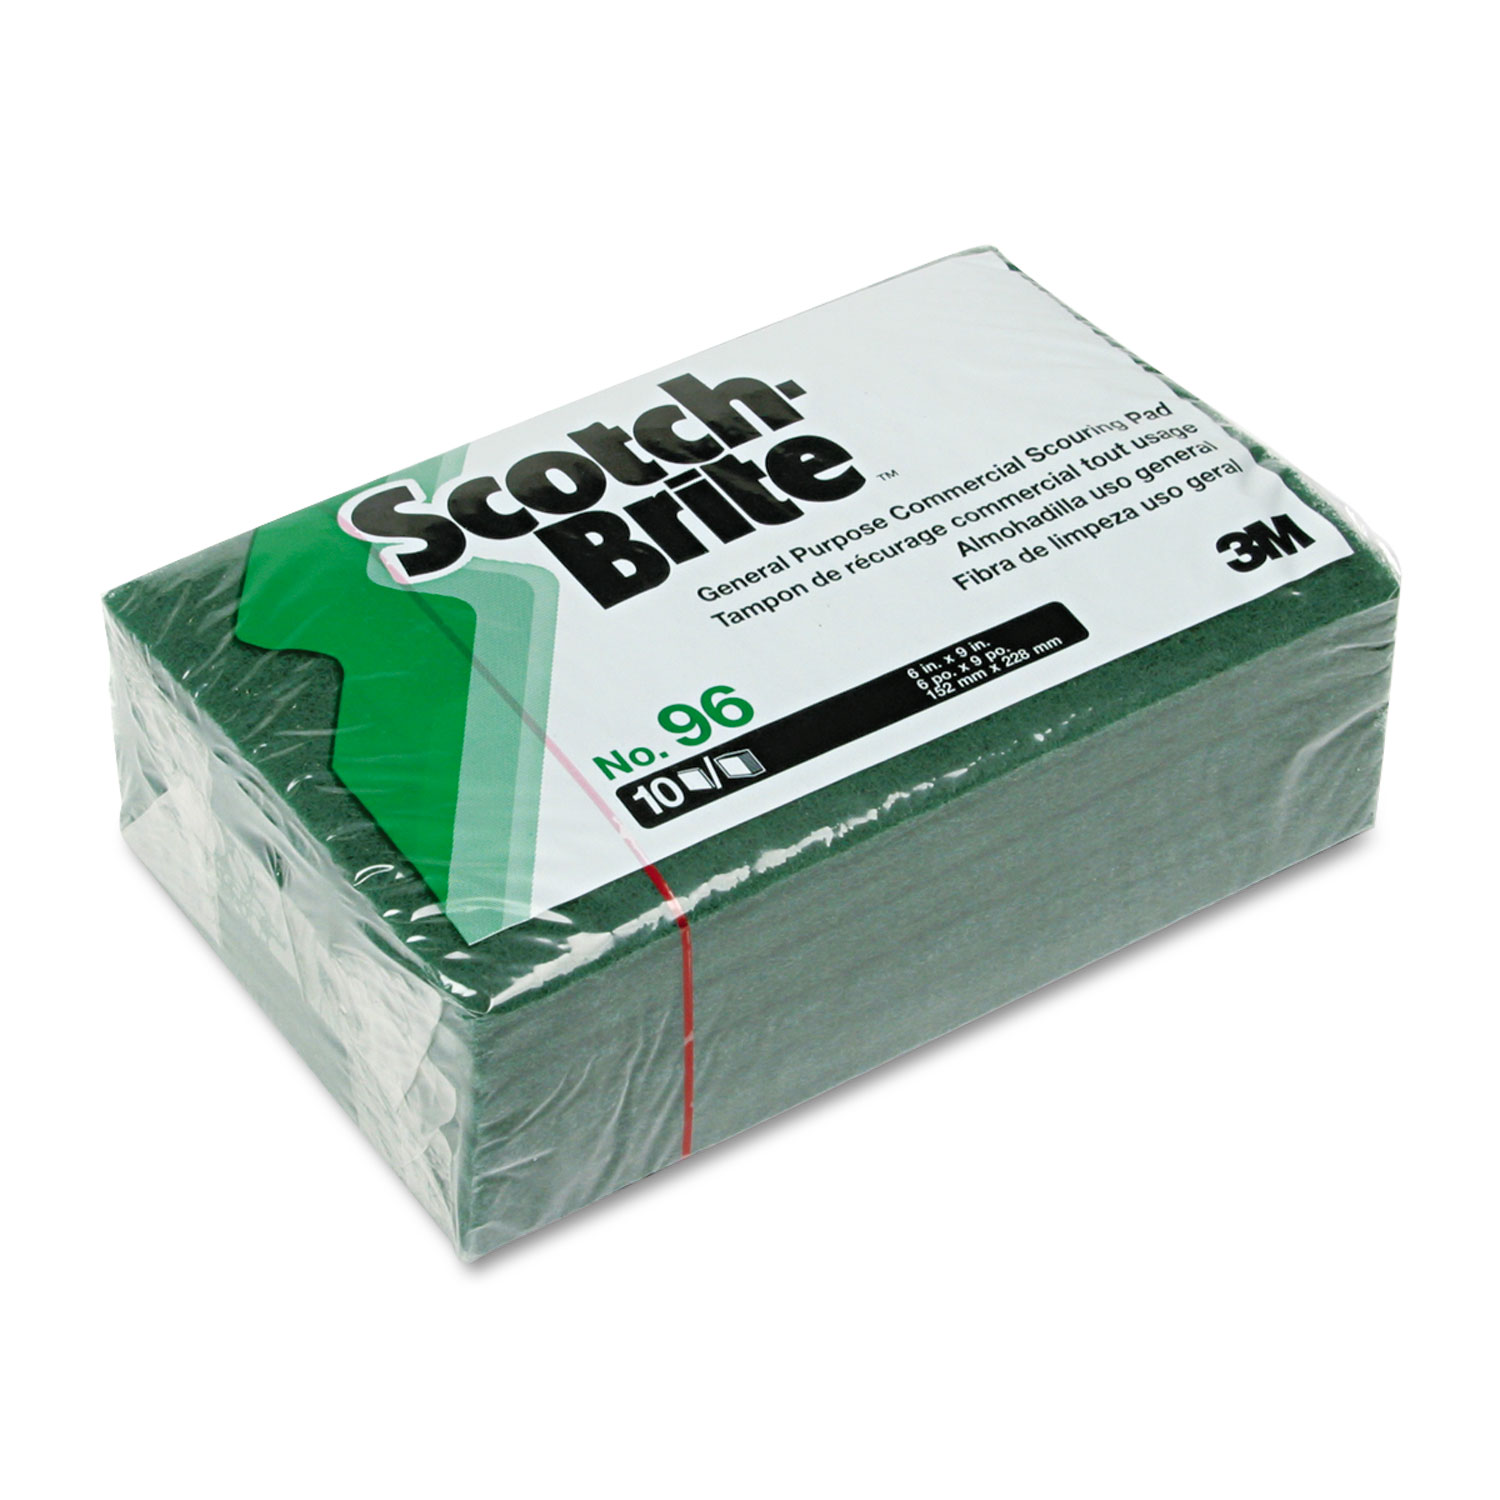 Commercial Scouring Pad, 6 x 9, 10/Pack